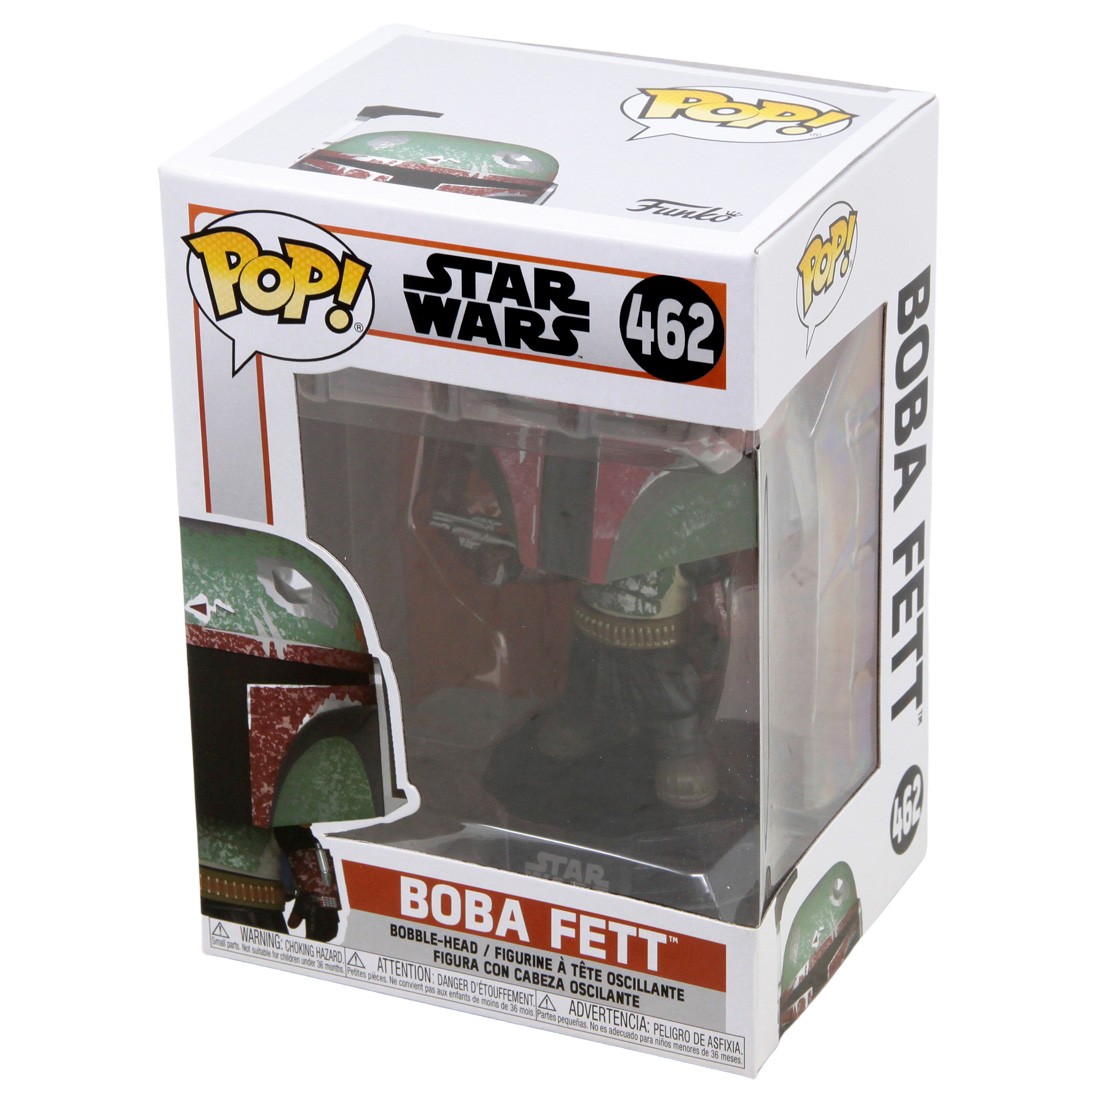 BAIT on X: The BAIT Exclusive Funko POP Star Wars Vintage Boba Fett Figure  is available via first come first serve! Please visit us at   to place your order! Figure will